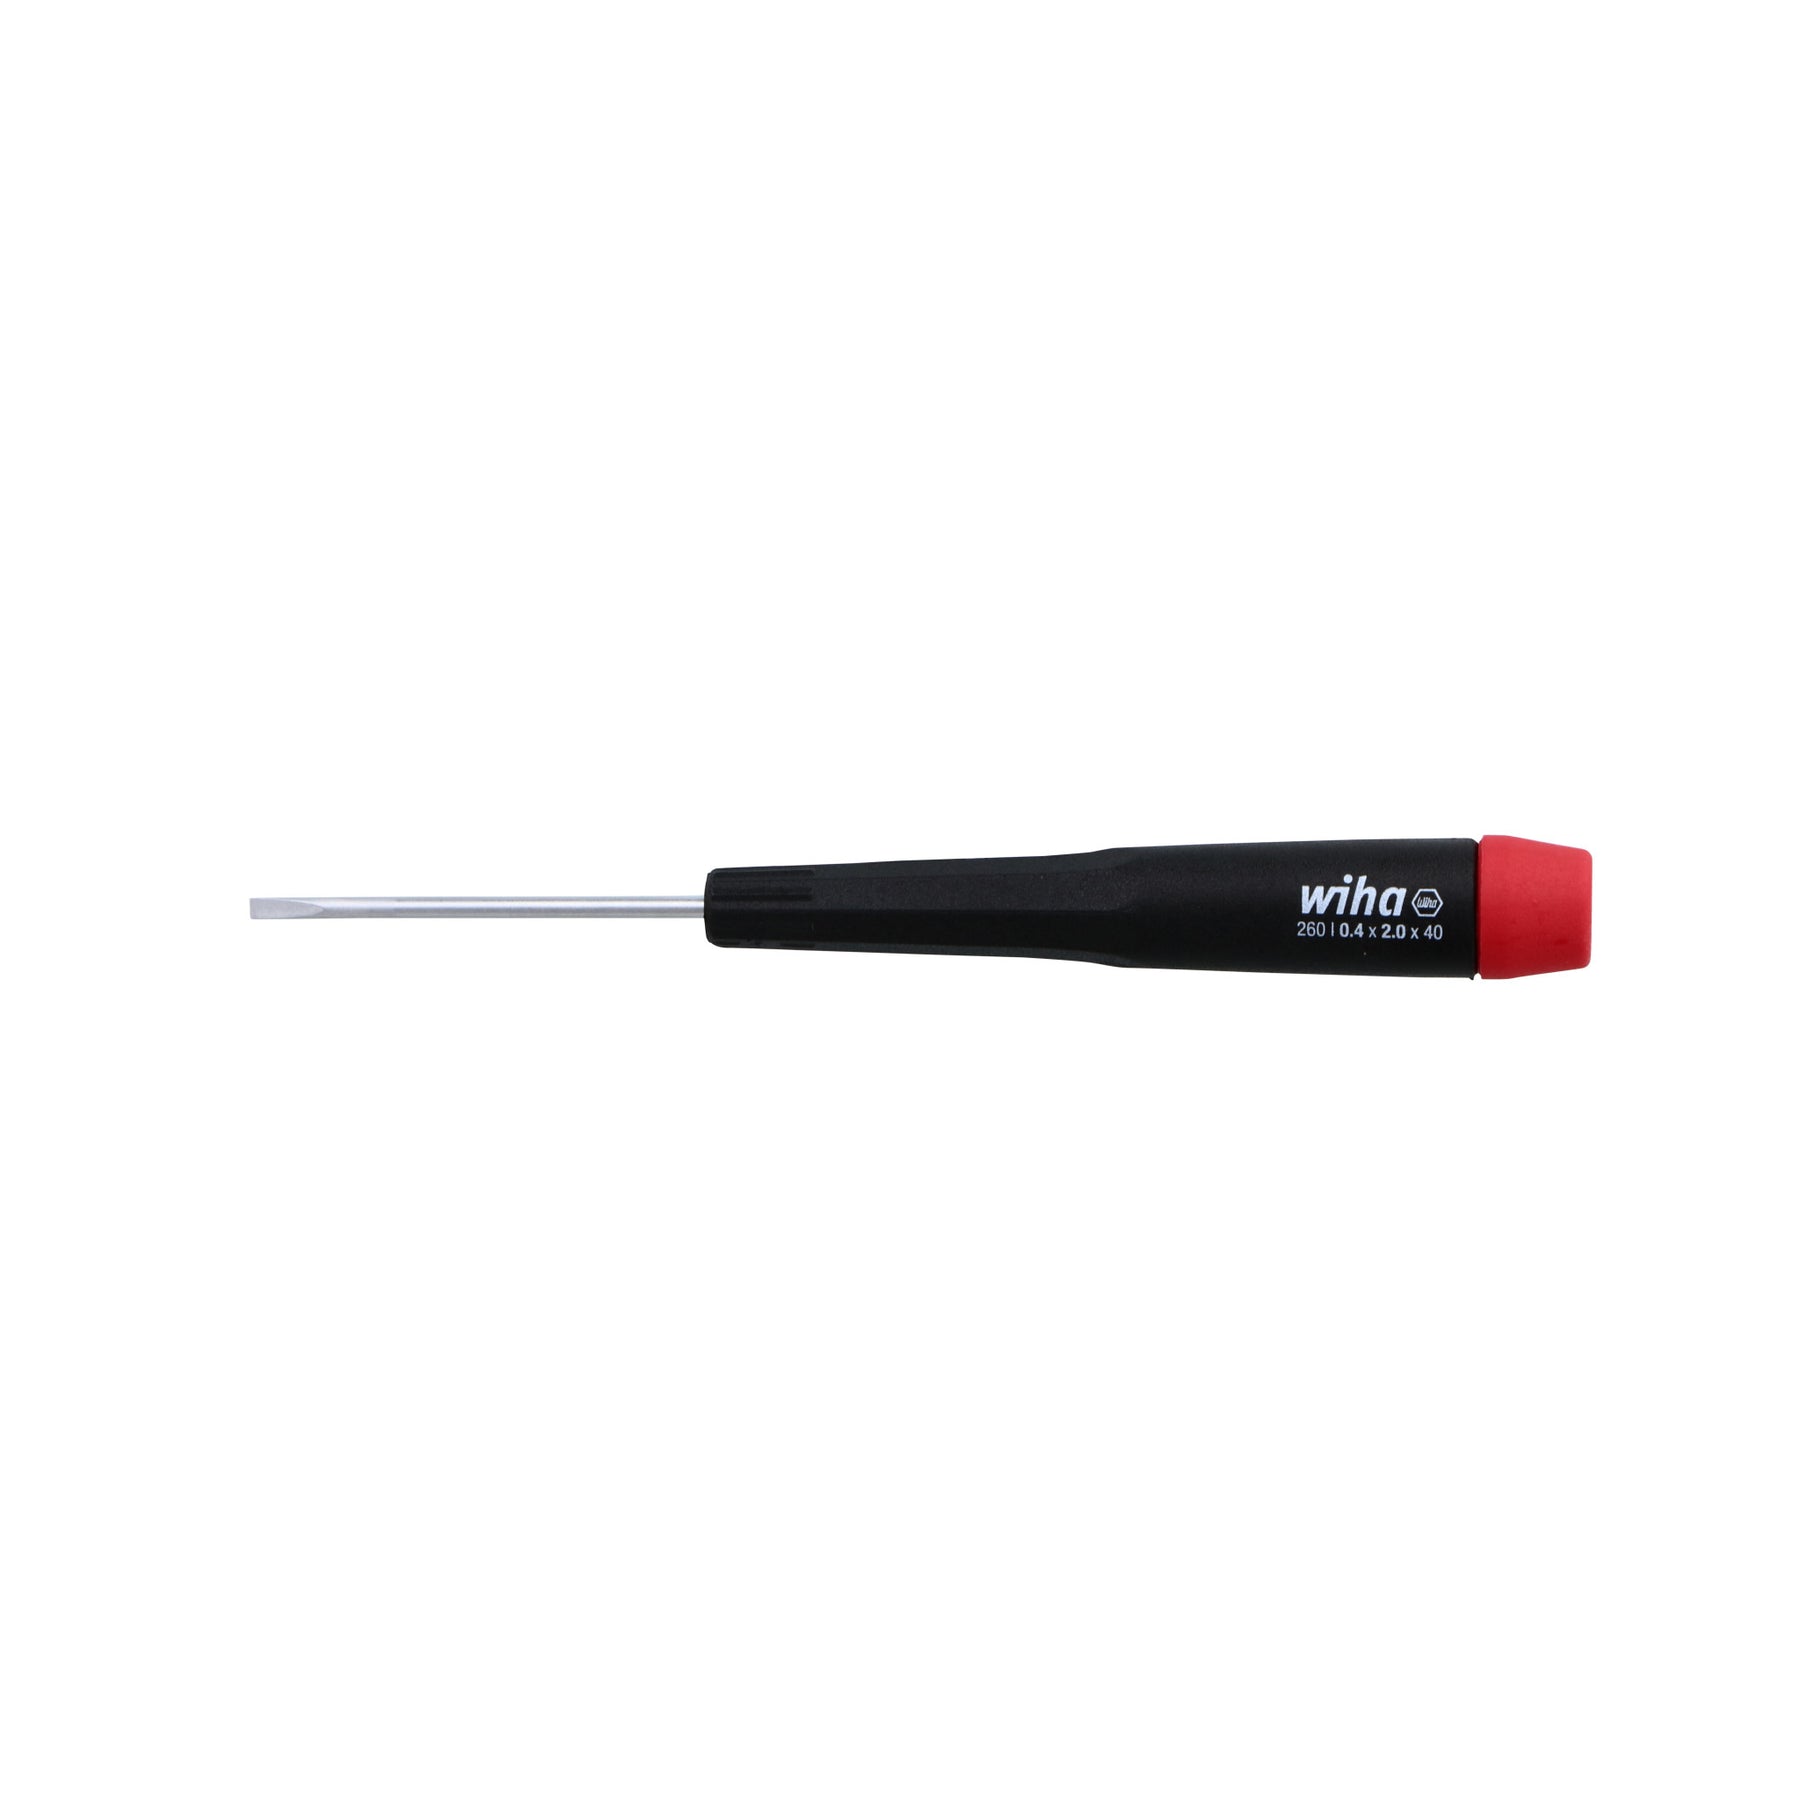 Precision Slotted Screwdriver 2.0mm x 40mm